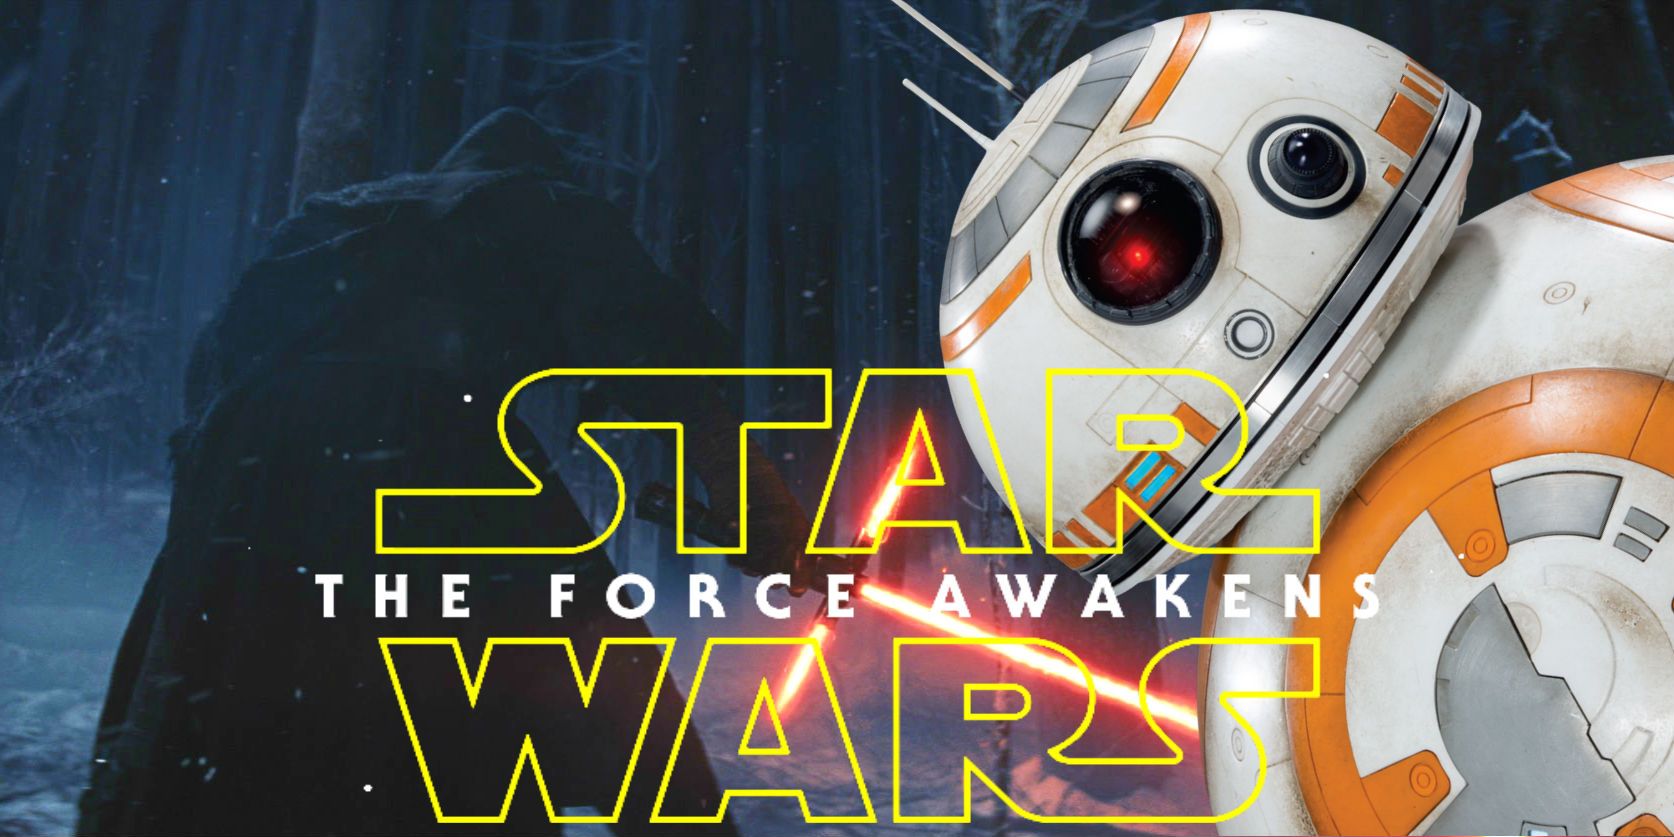 Adam Driver as Kylo Ren and BB-8 in Star Wars The Force Awakens trailer